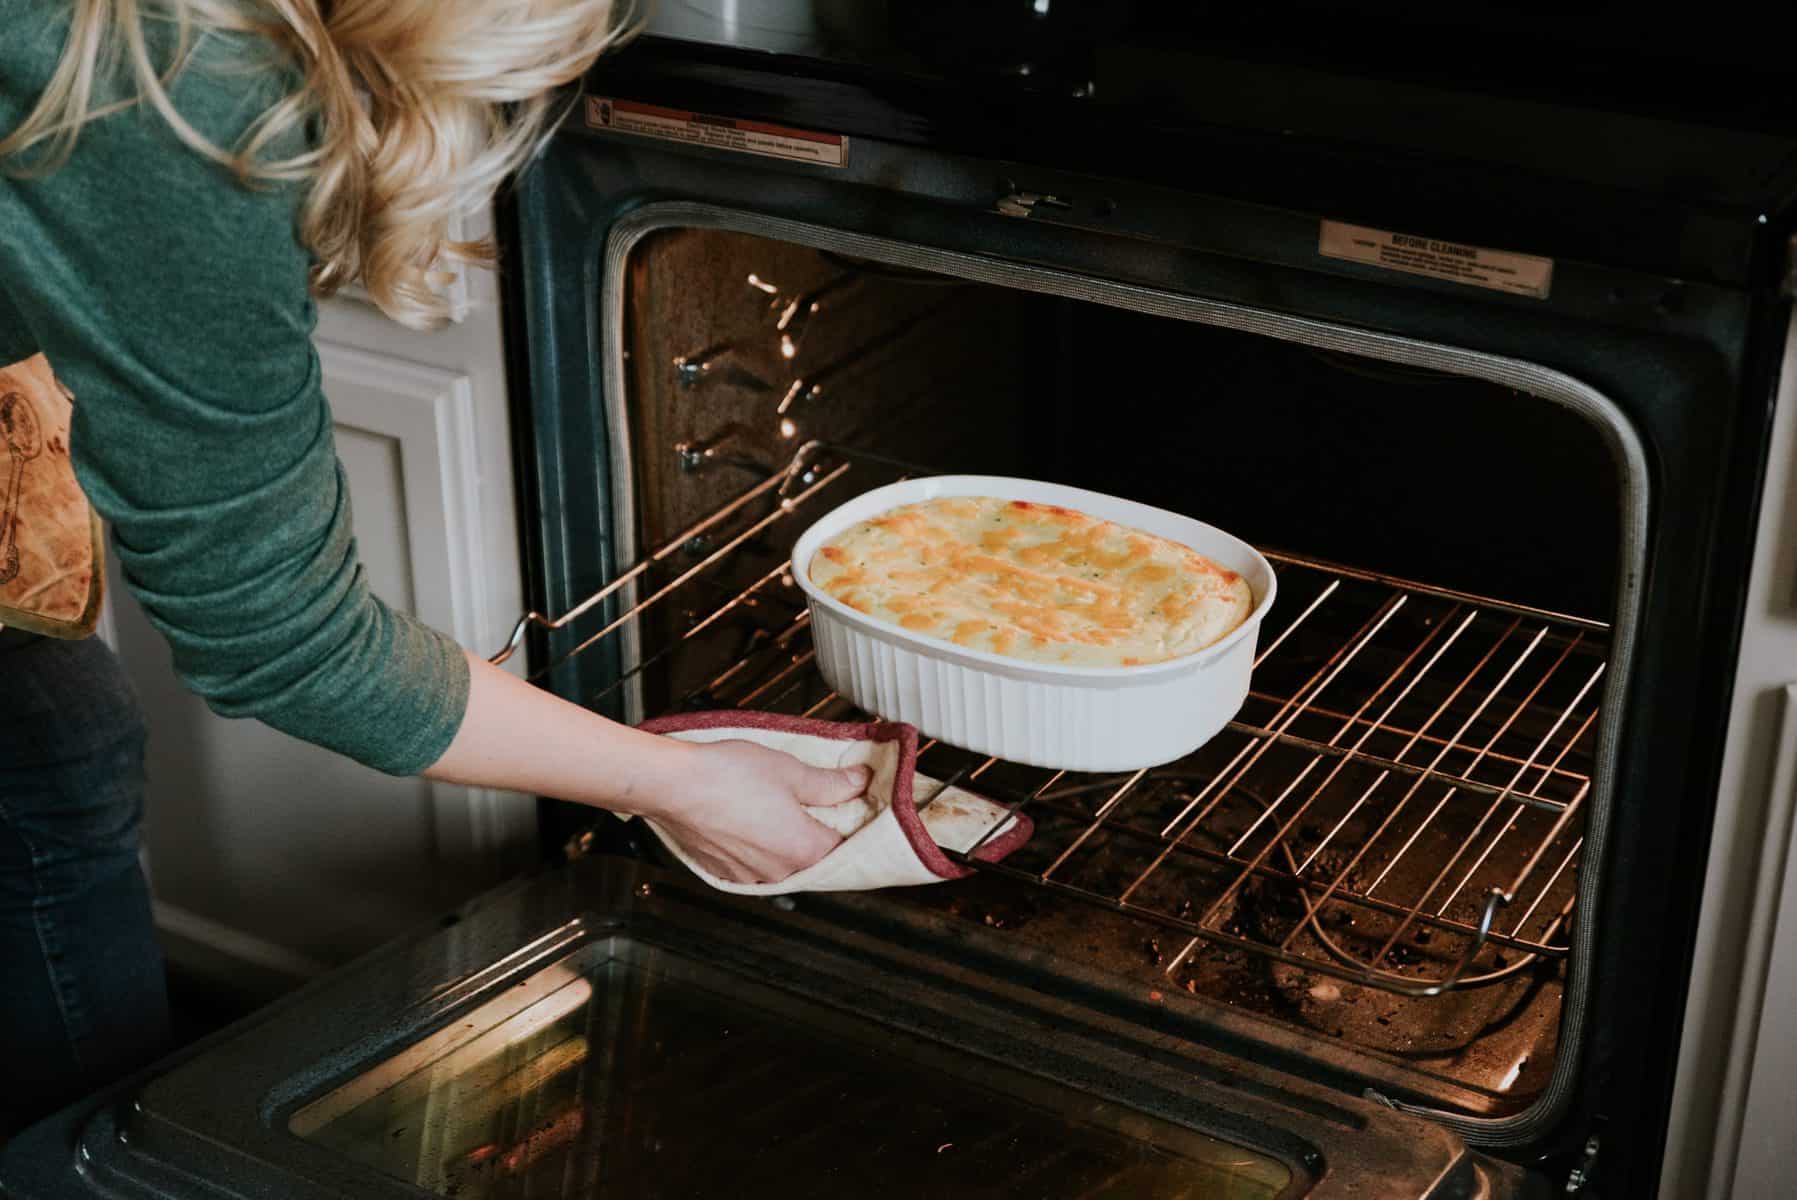 Pulling the mashed potato casserole out of the oven.